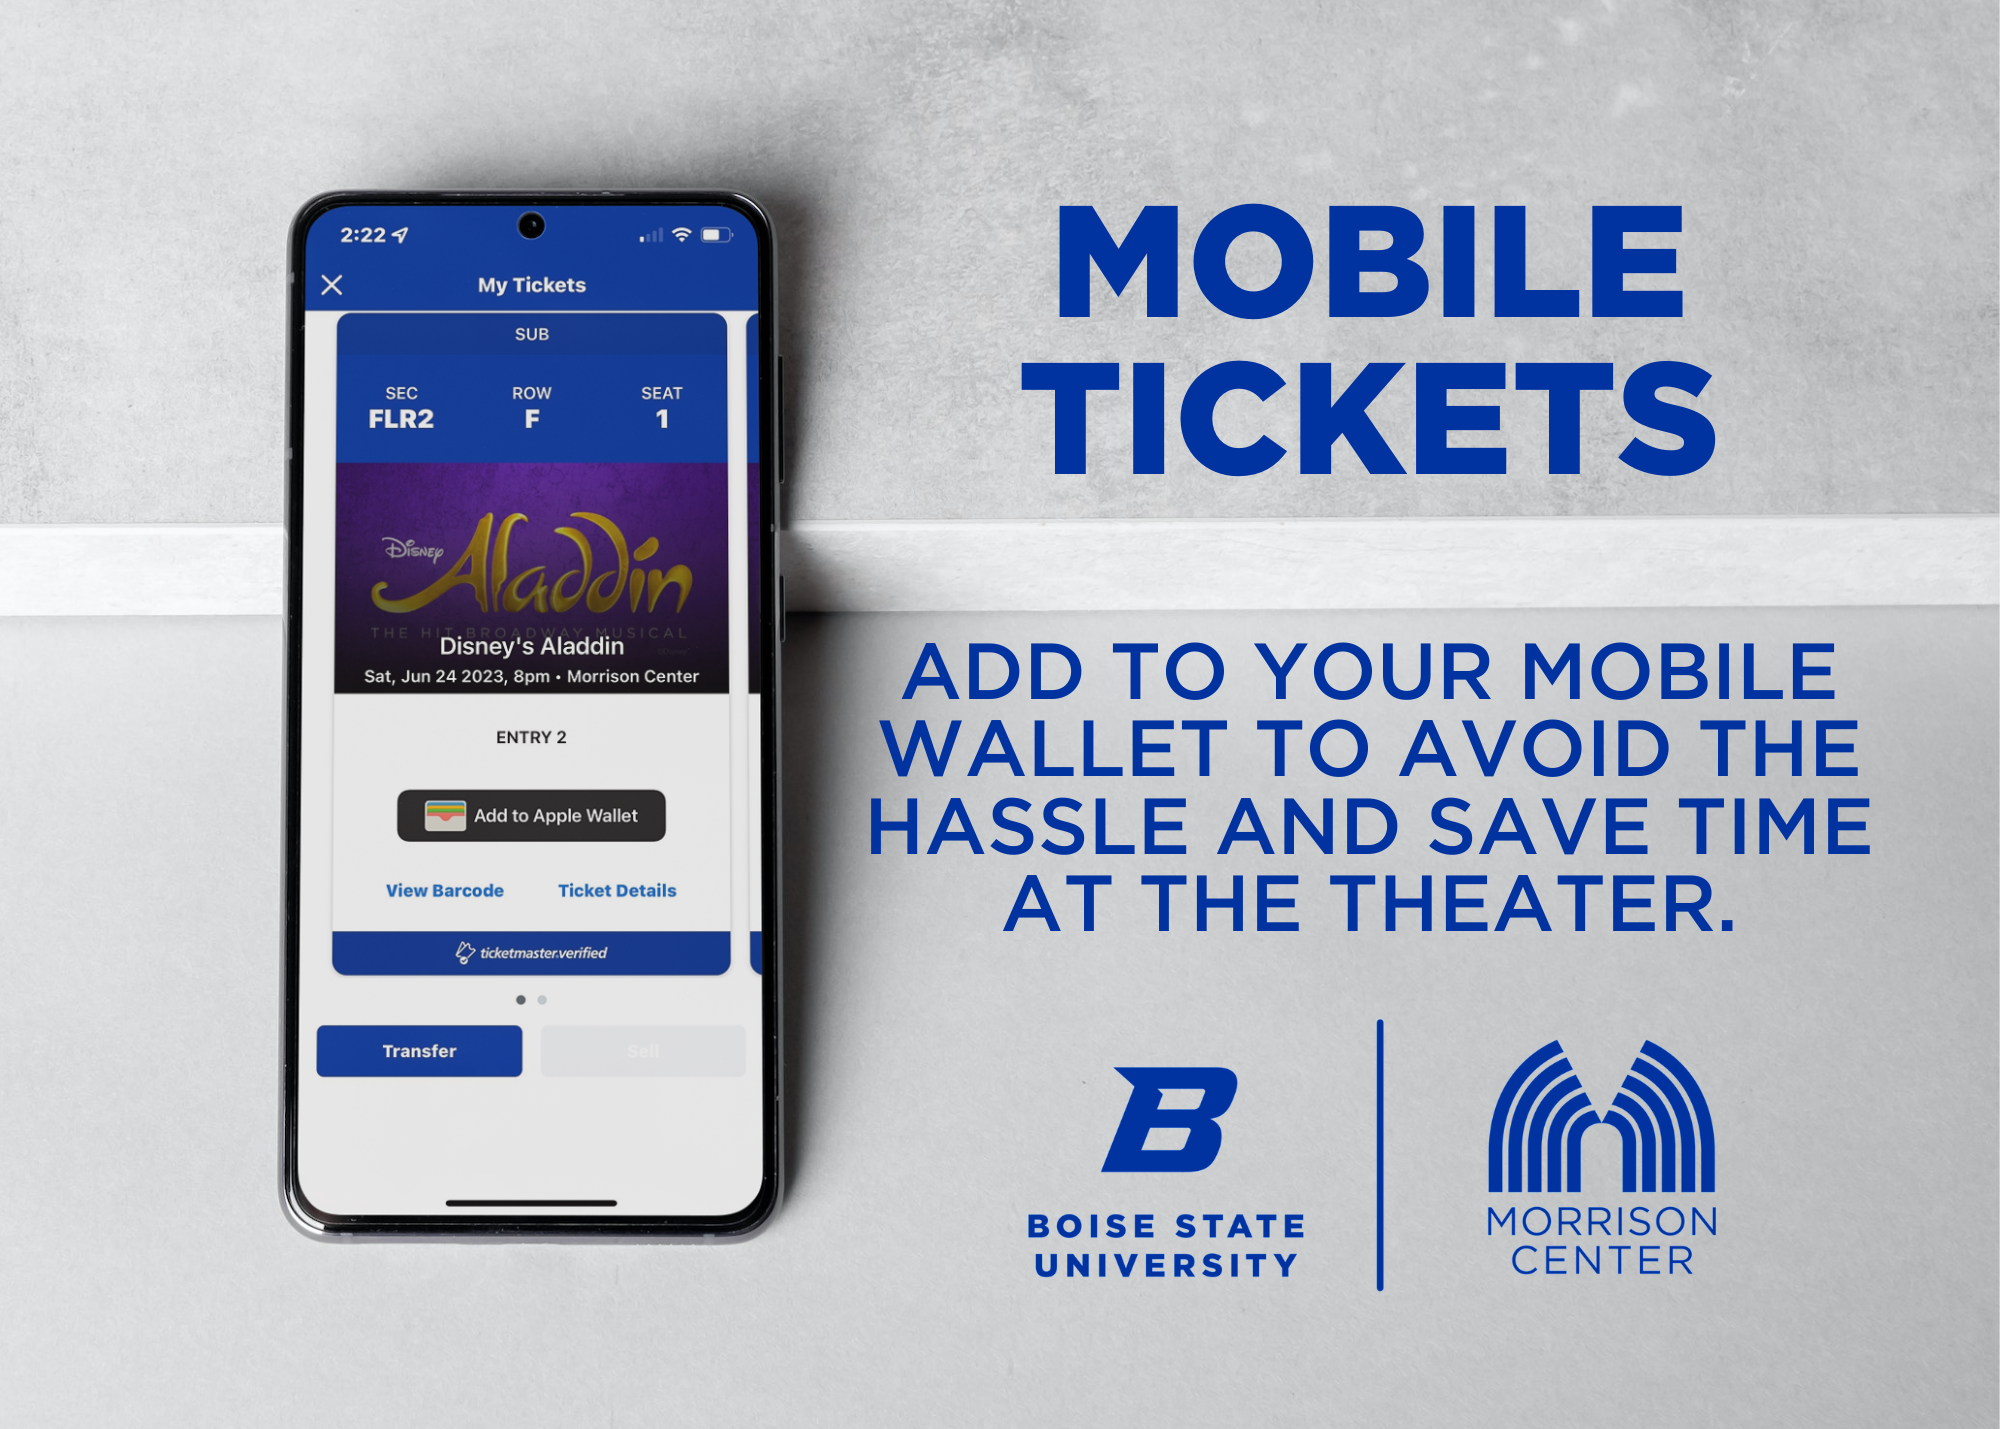 Mobile Tickets - Add To Your Mobile Wallet To Avoid The Hassle And Save Time At The Theater